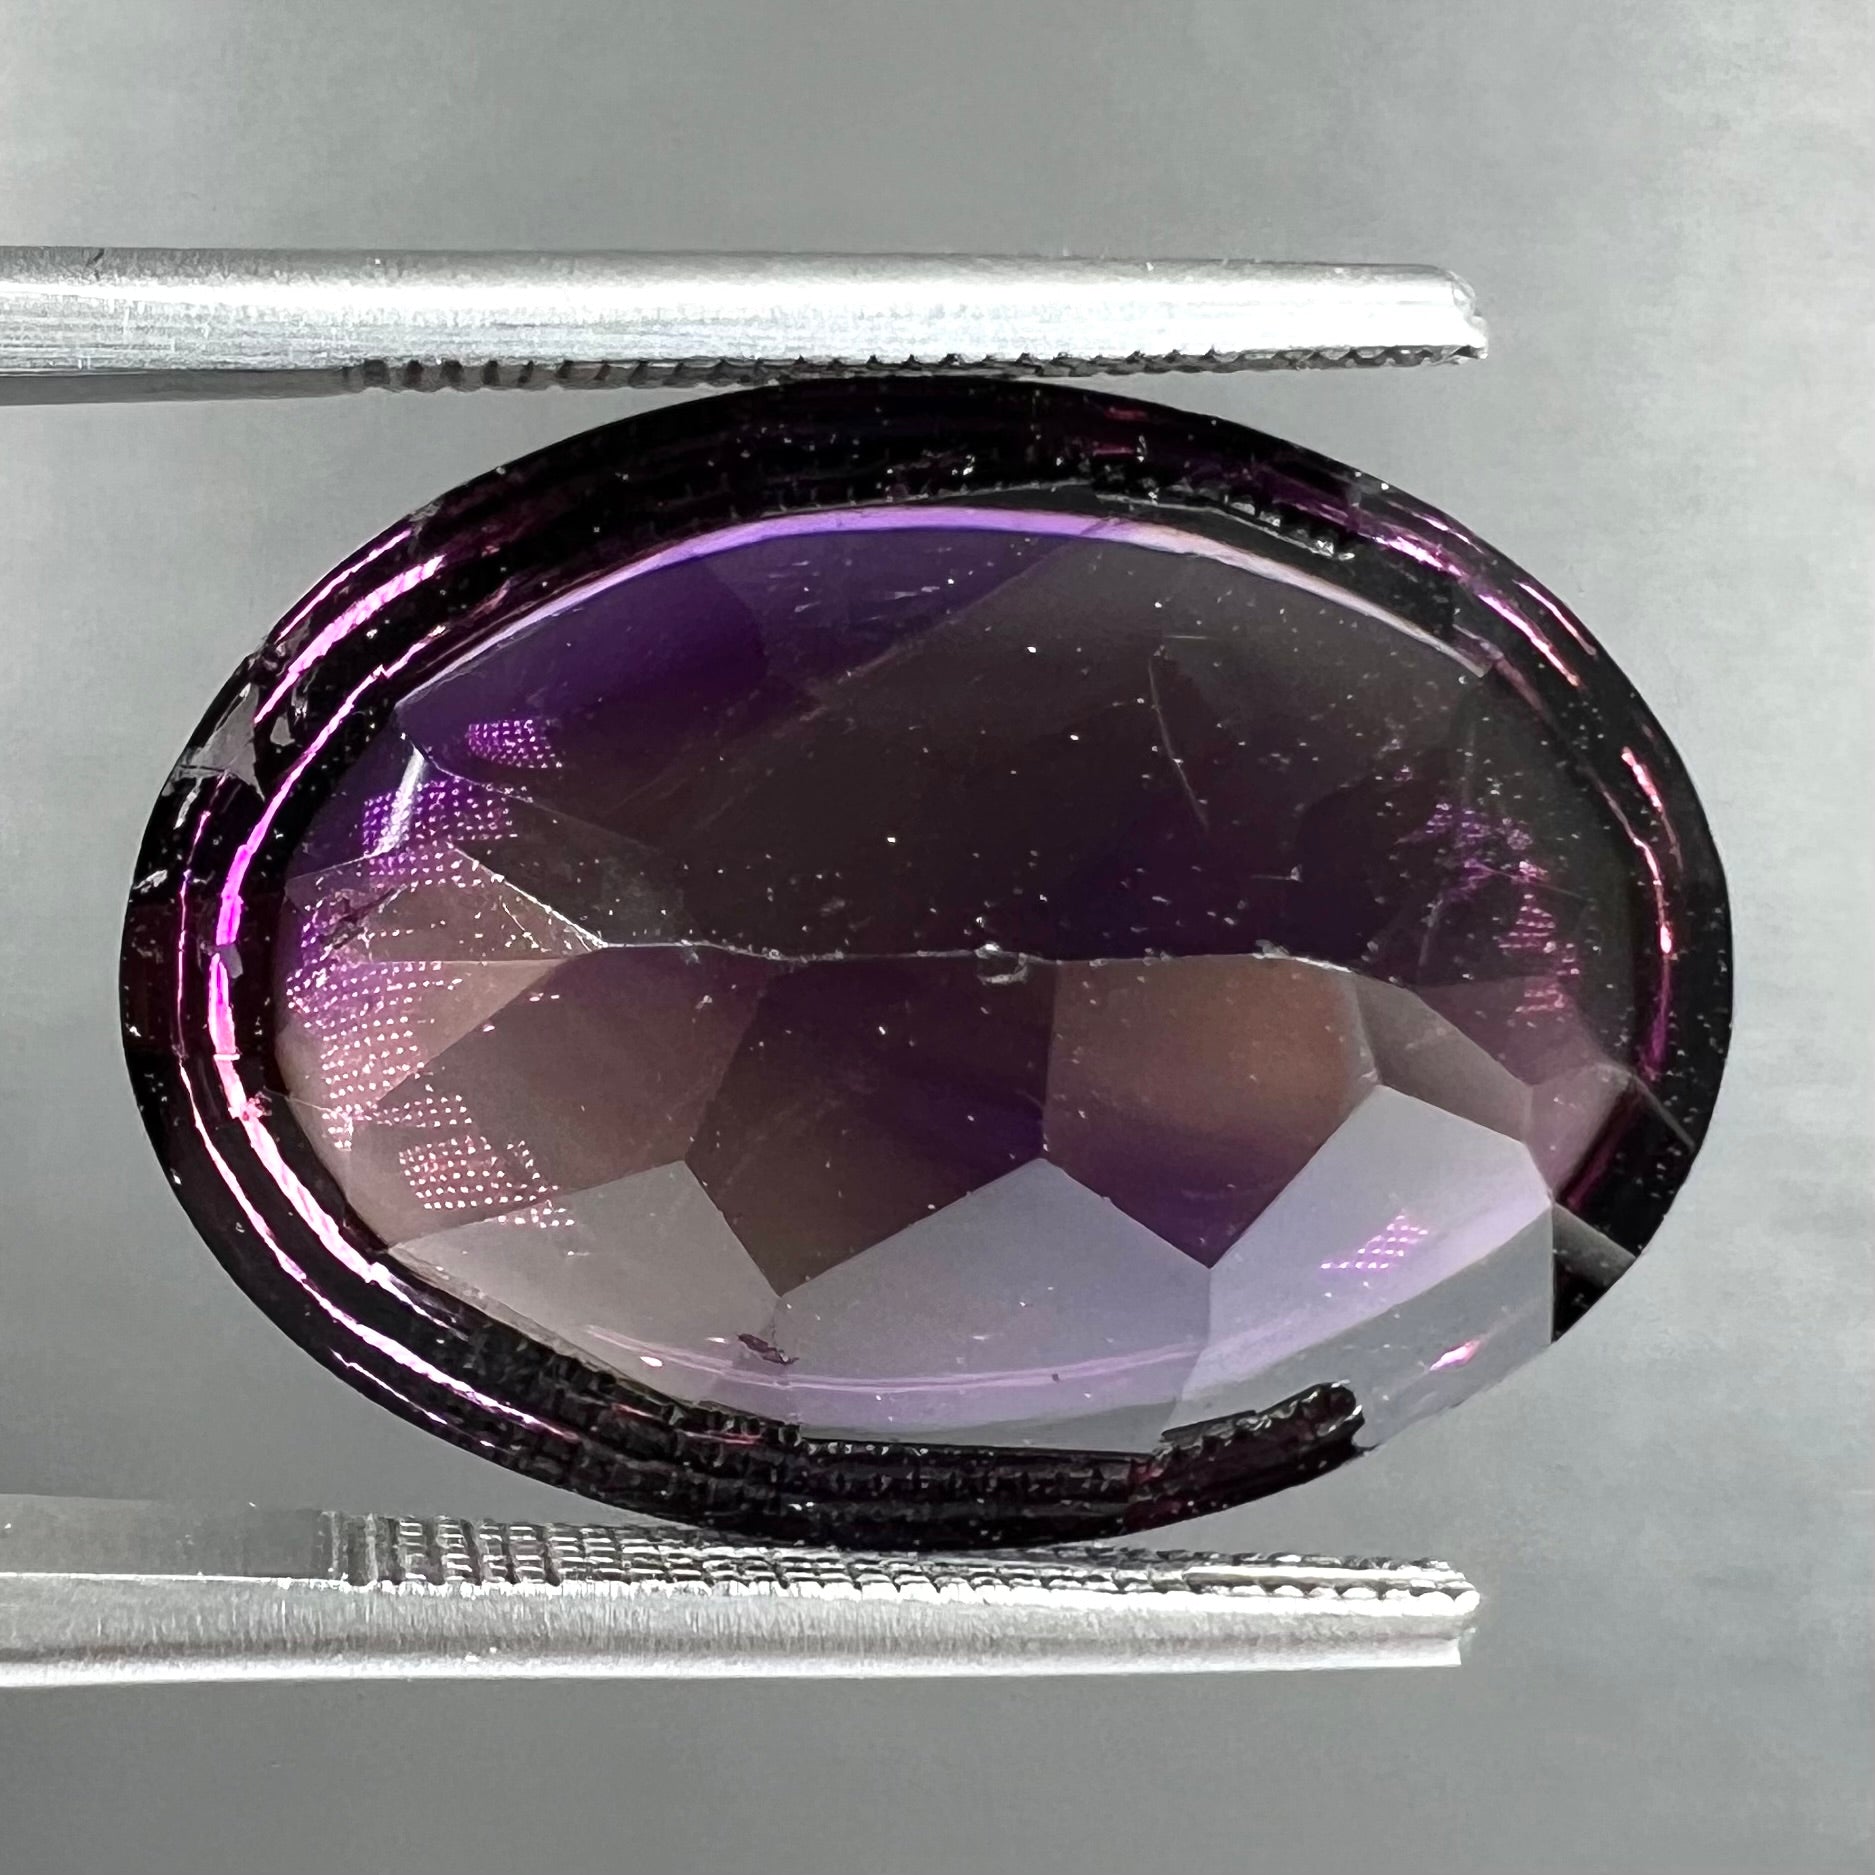 A loose, oval buff top cut amethyst gemstone.  The top of the stone is domed, and the bottom is faceted.